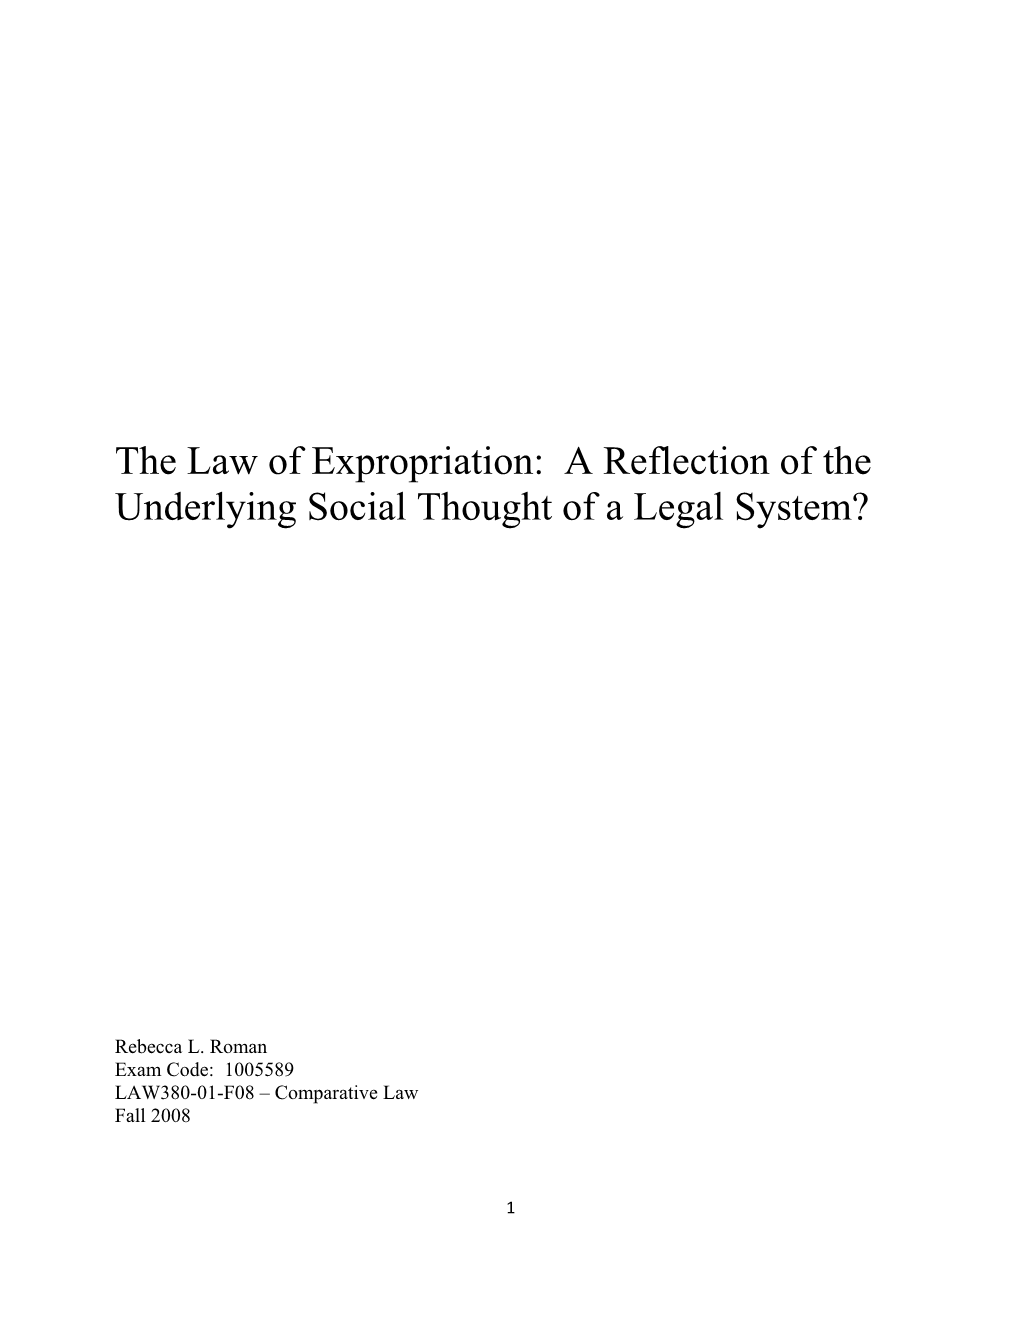 The Law of Expropriation: a Reflection of the Underlying Social Thought of a Legal System?